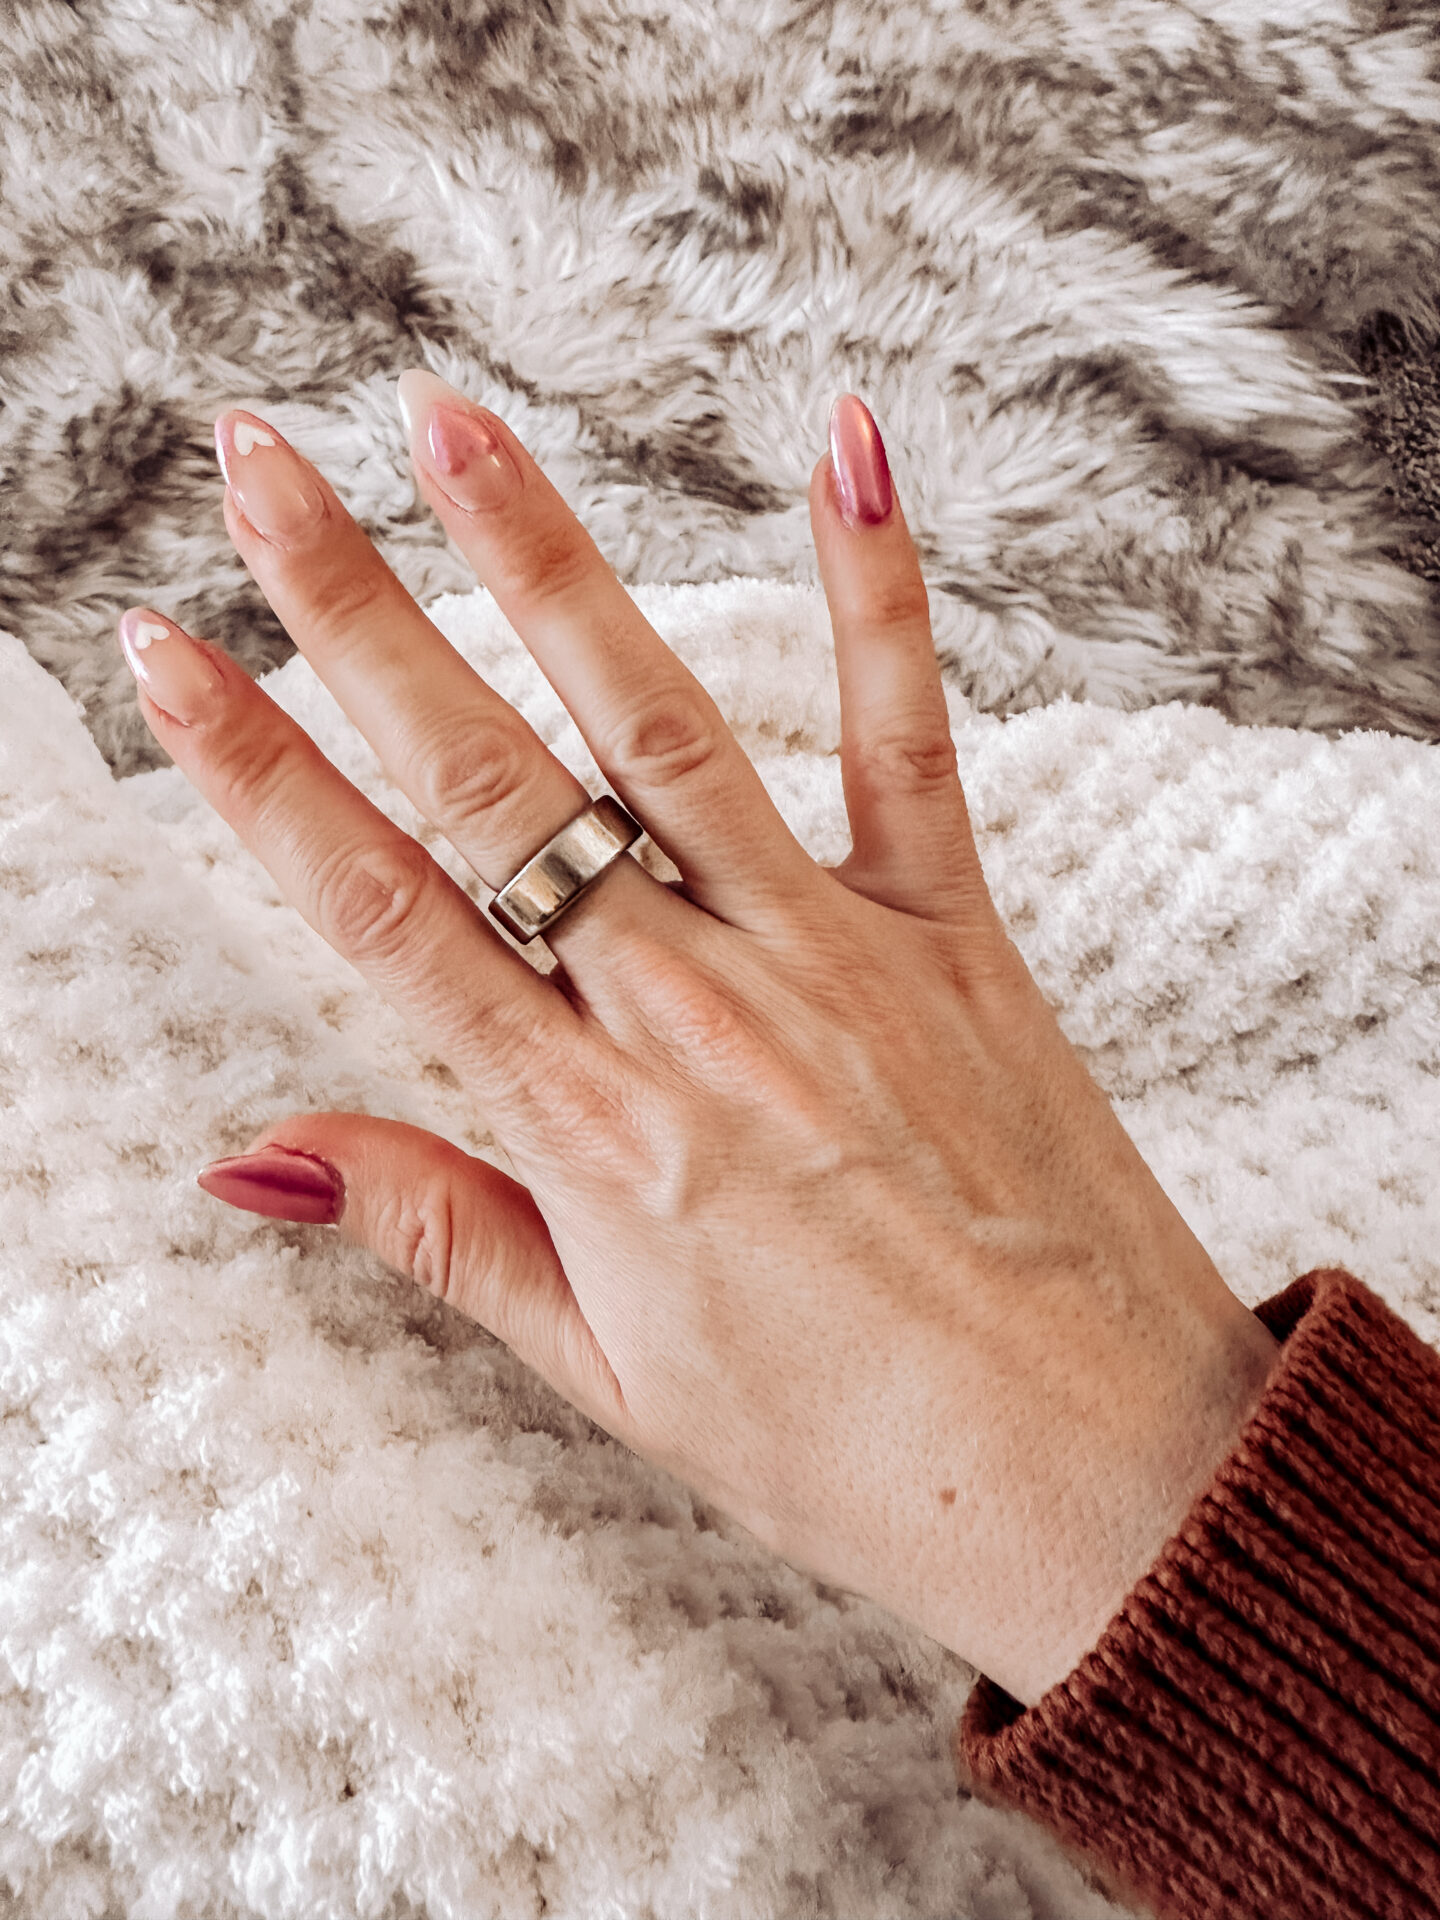 Which is worth your money? Oura Ring Vs. Fitbit. Testing out viral fitness tracking devices to see how they measure up! By lifestyle blogger Angela Lanter